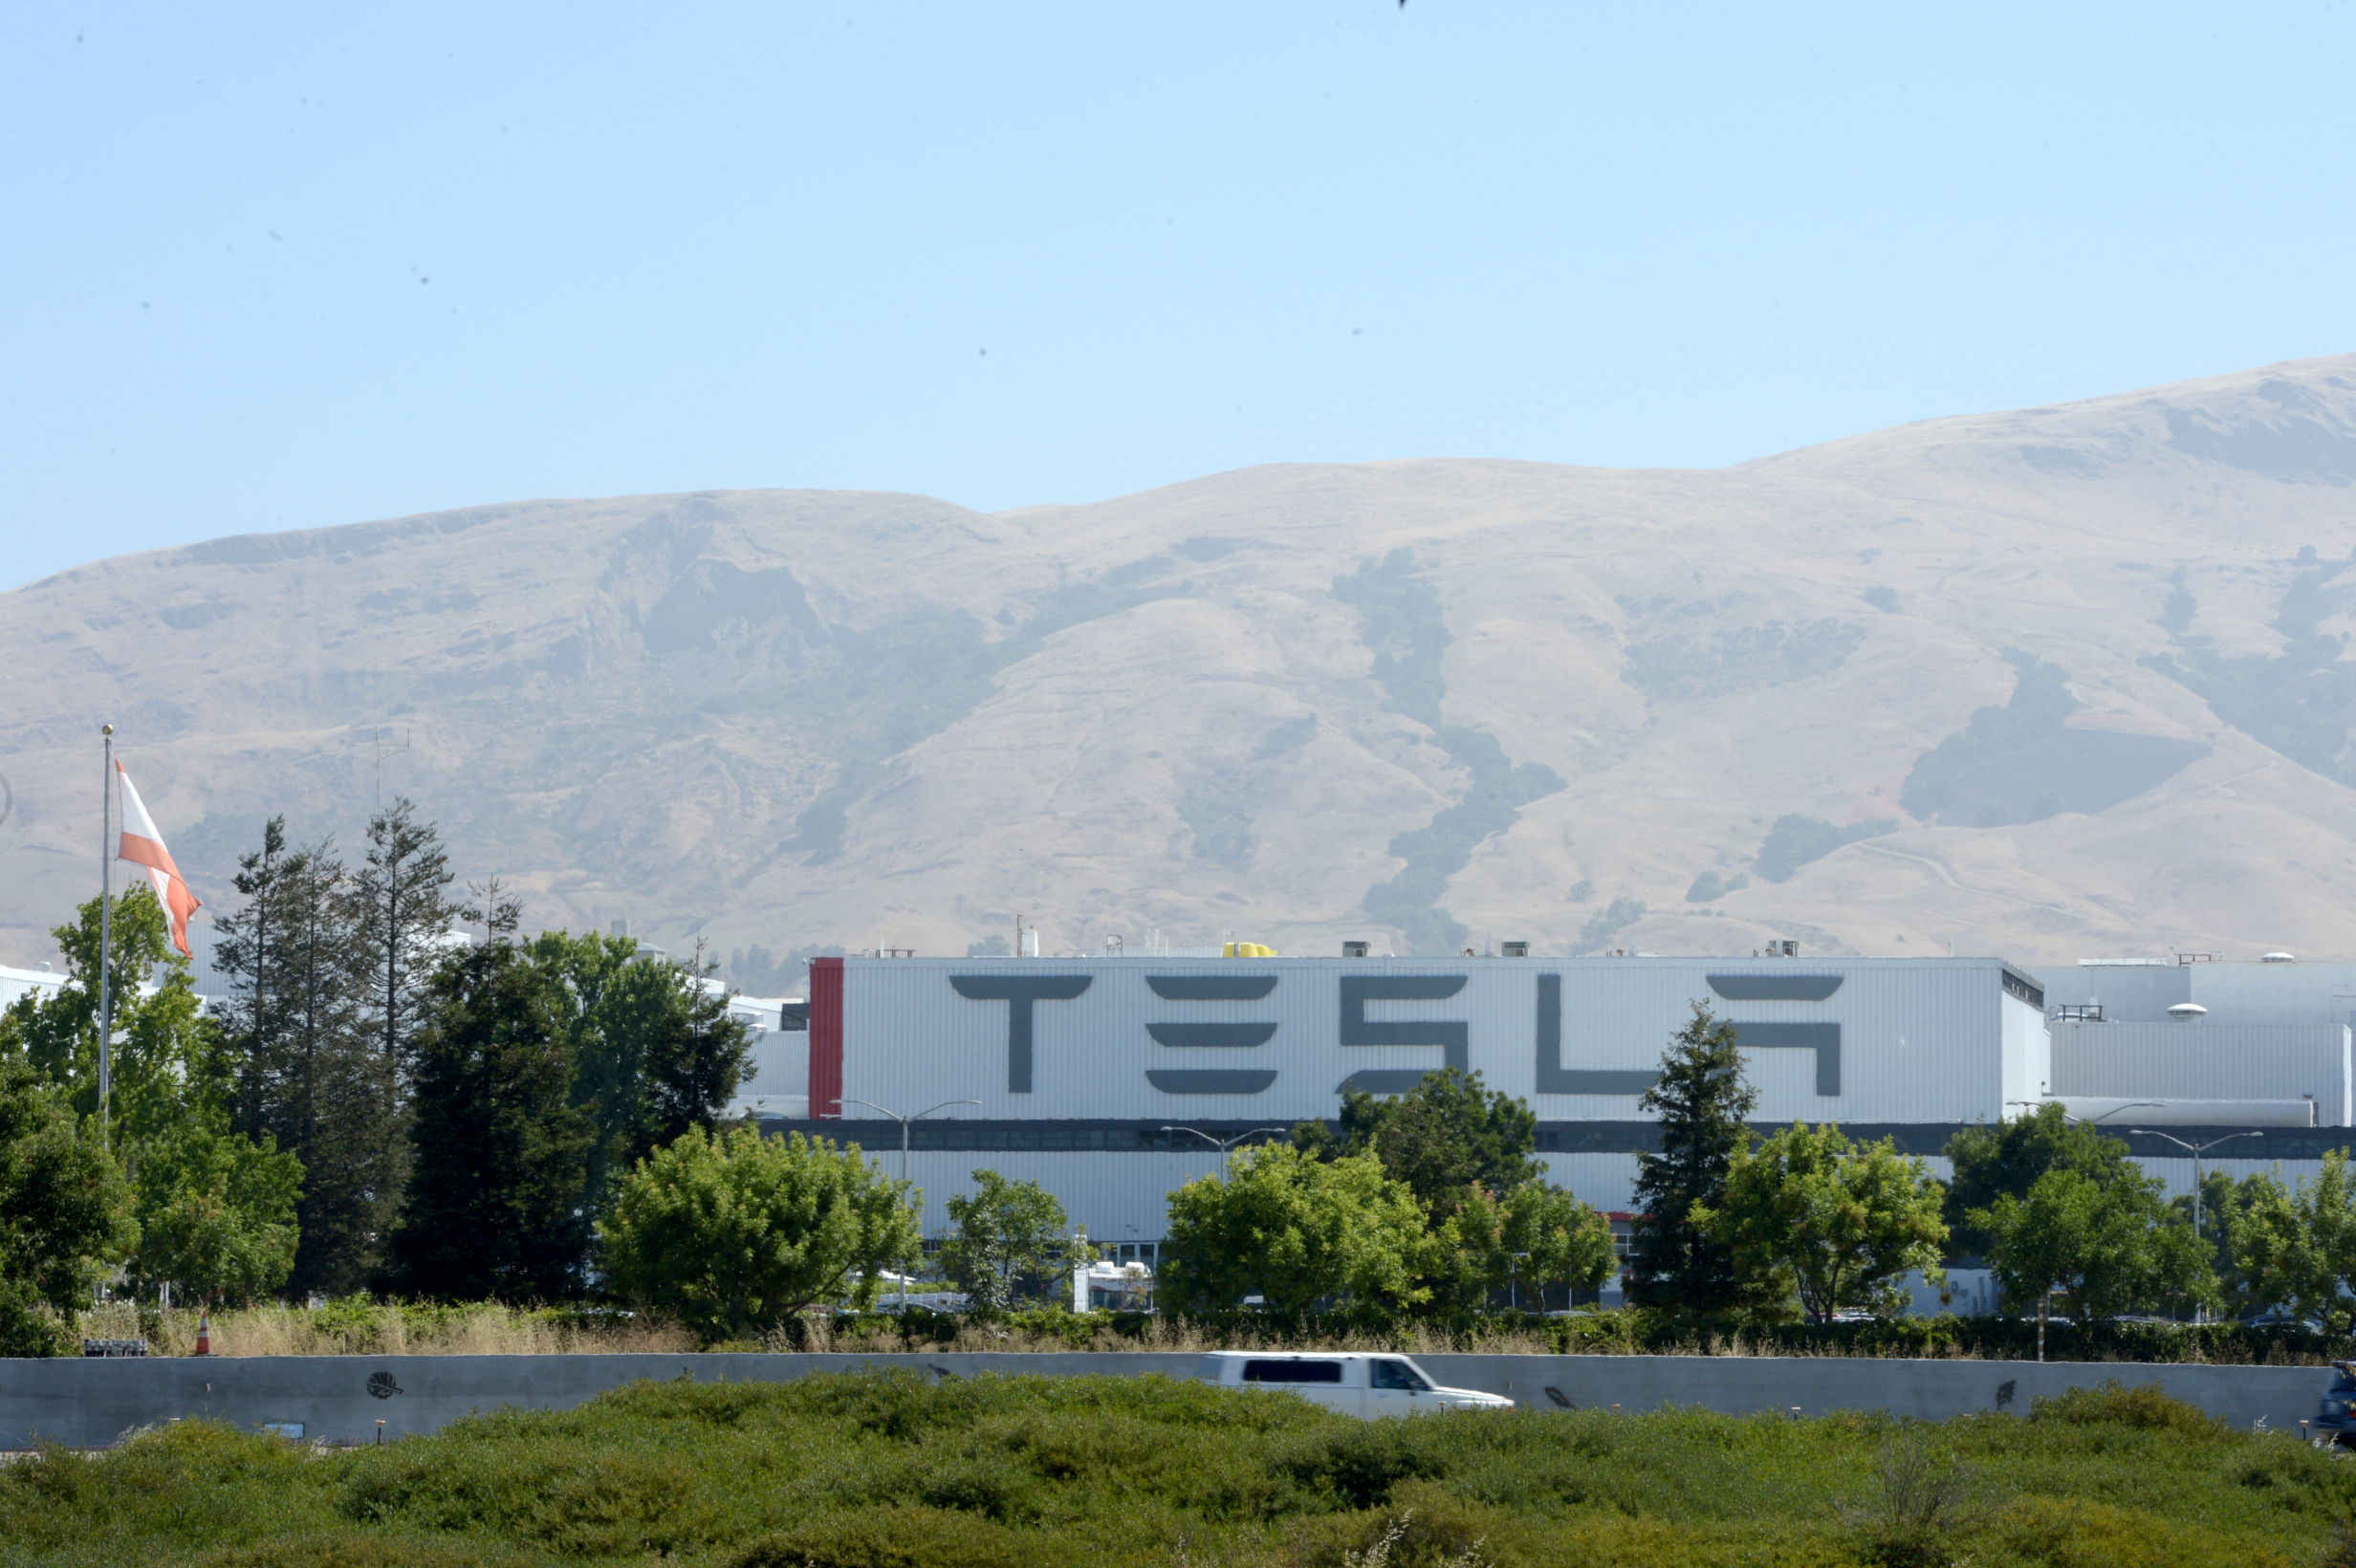 Exception: Tesla sold more cars in Q1 2020